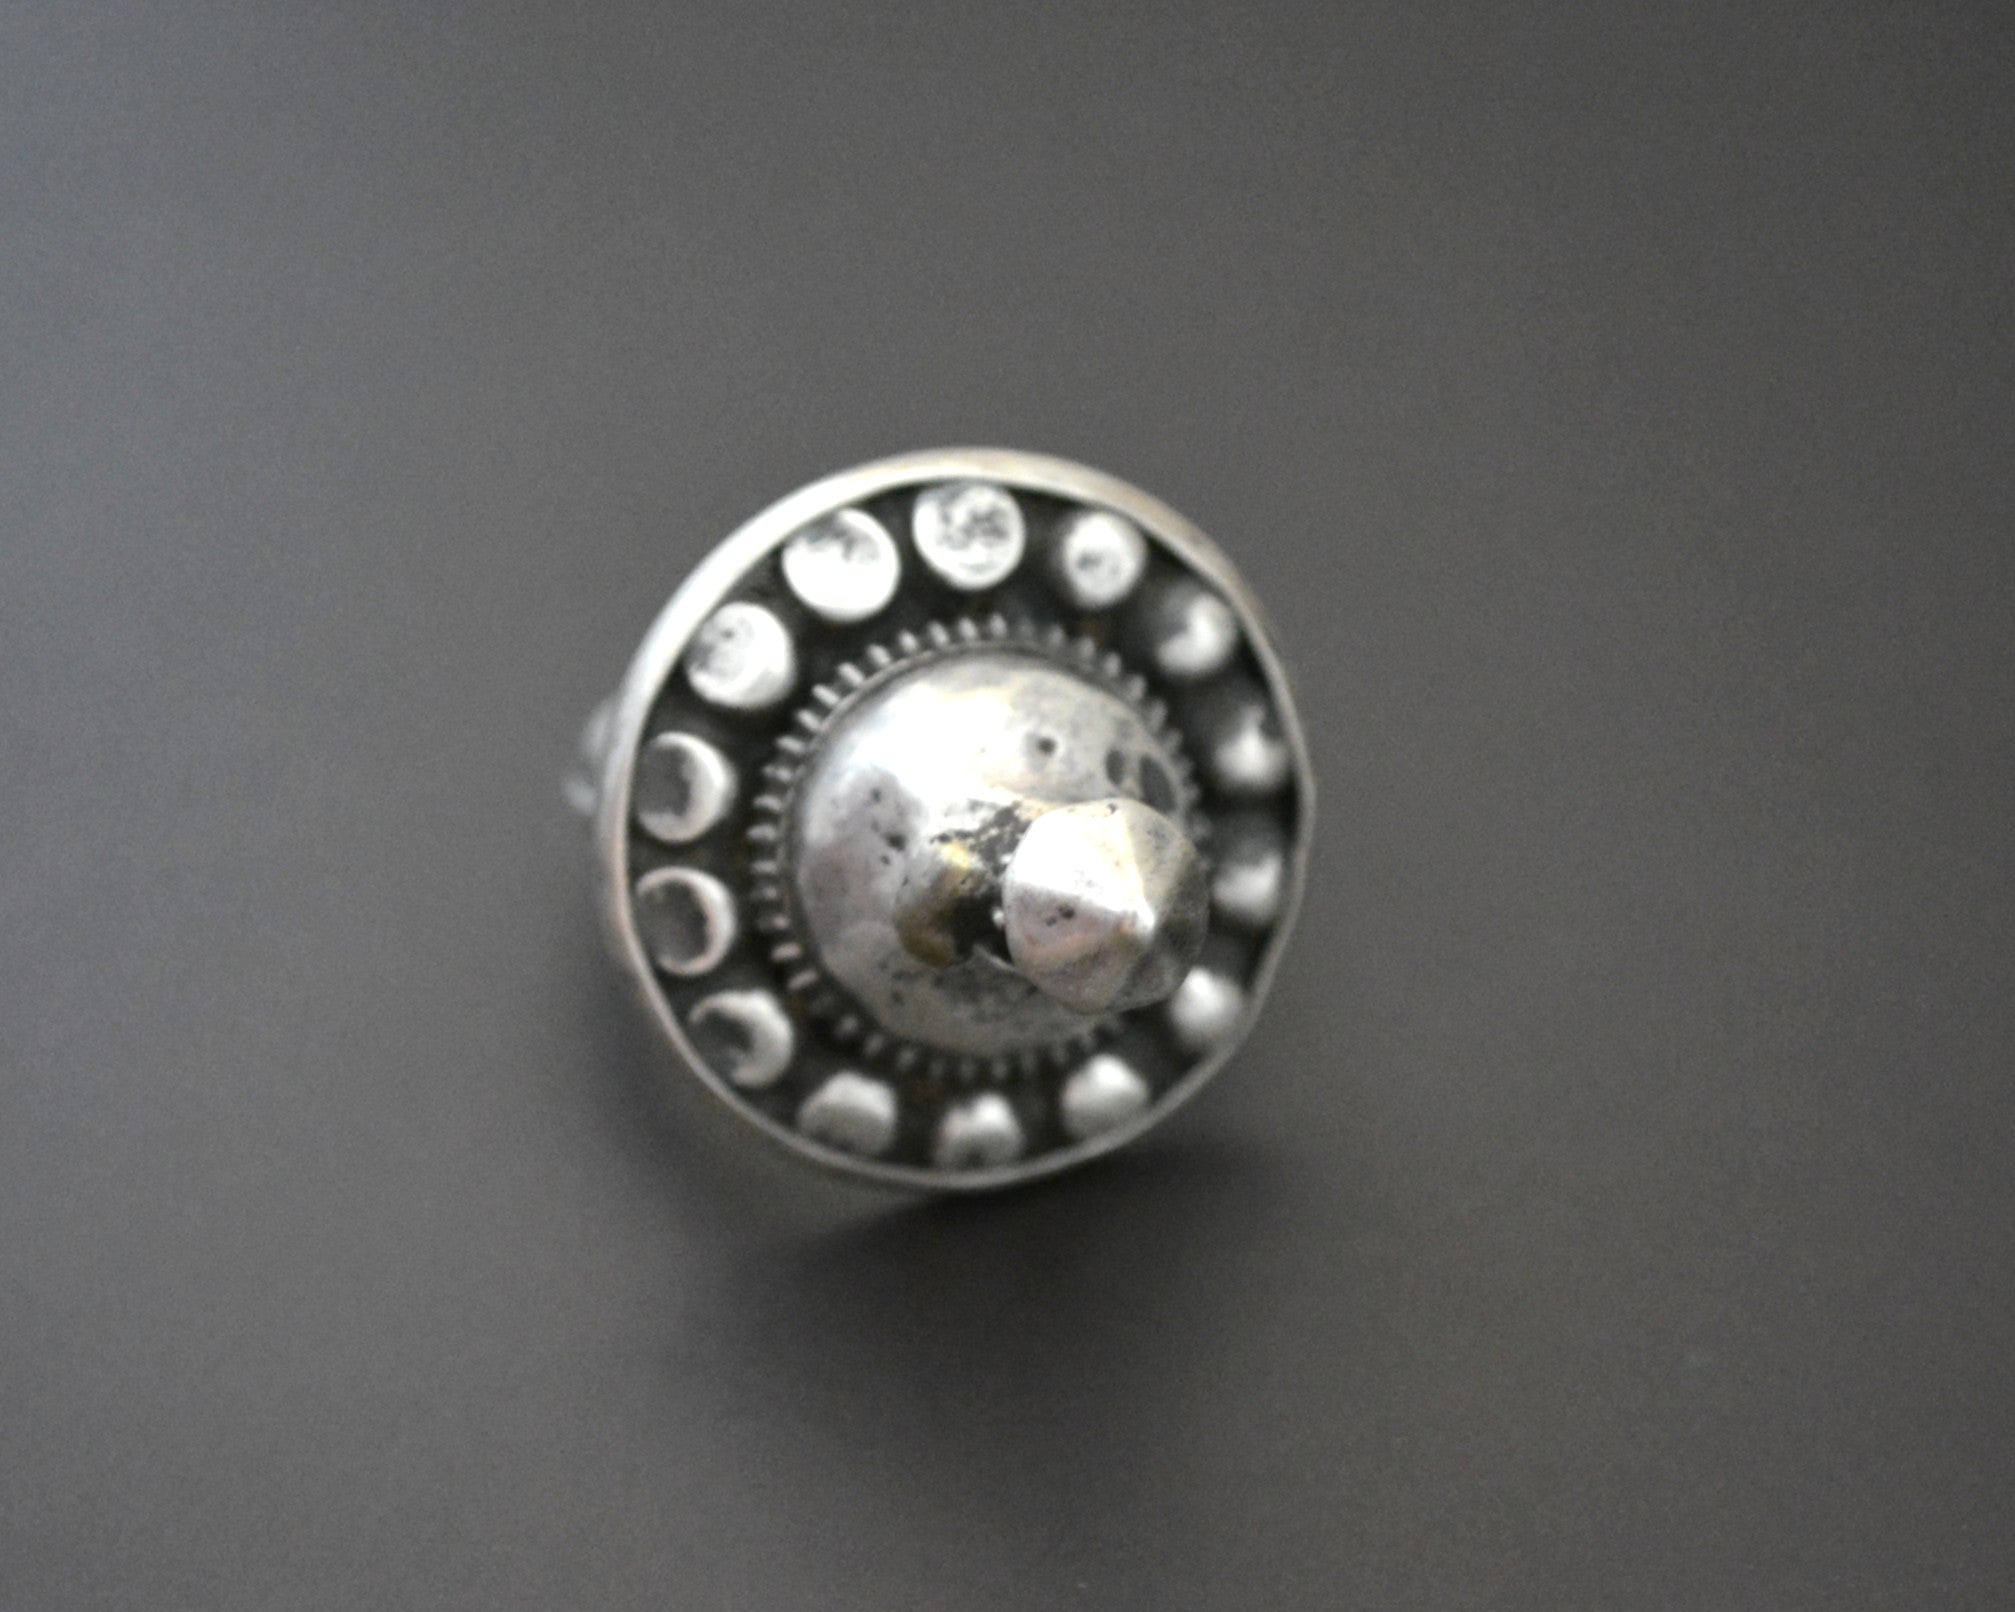 Rajasthani Silver Spike Ring - Size 8